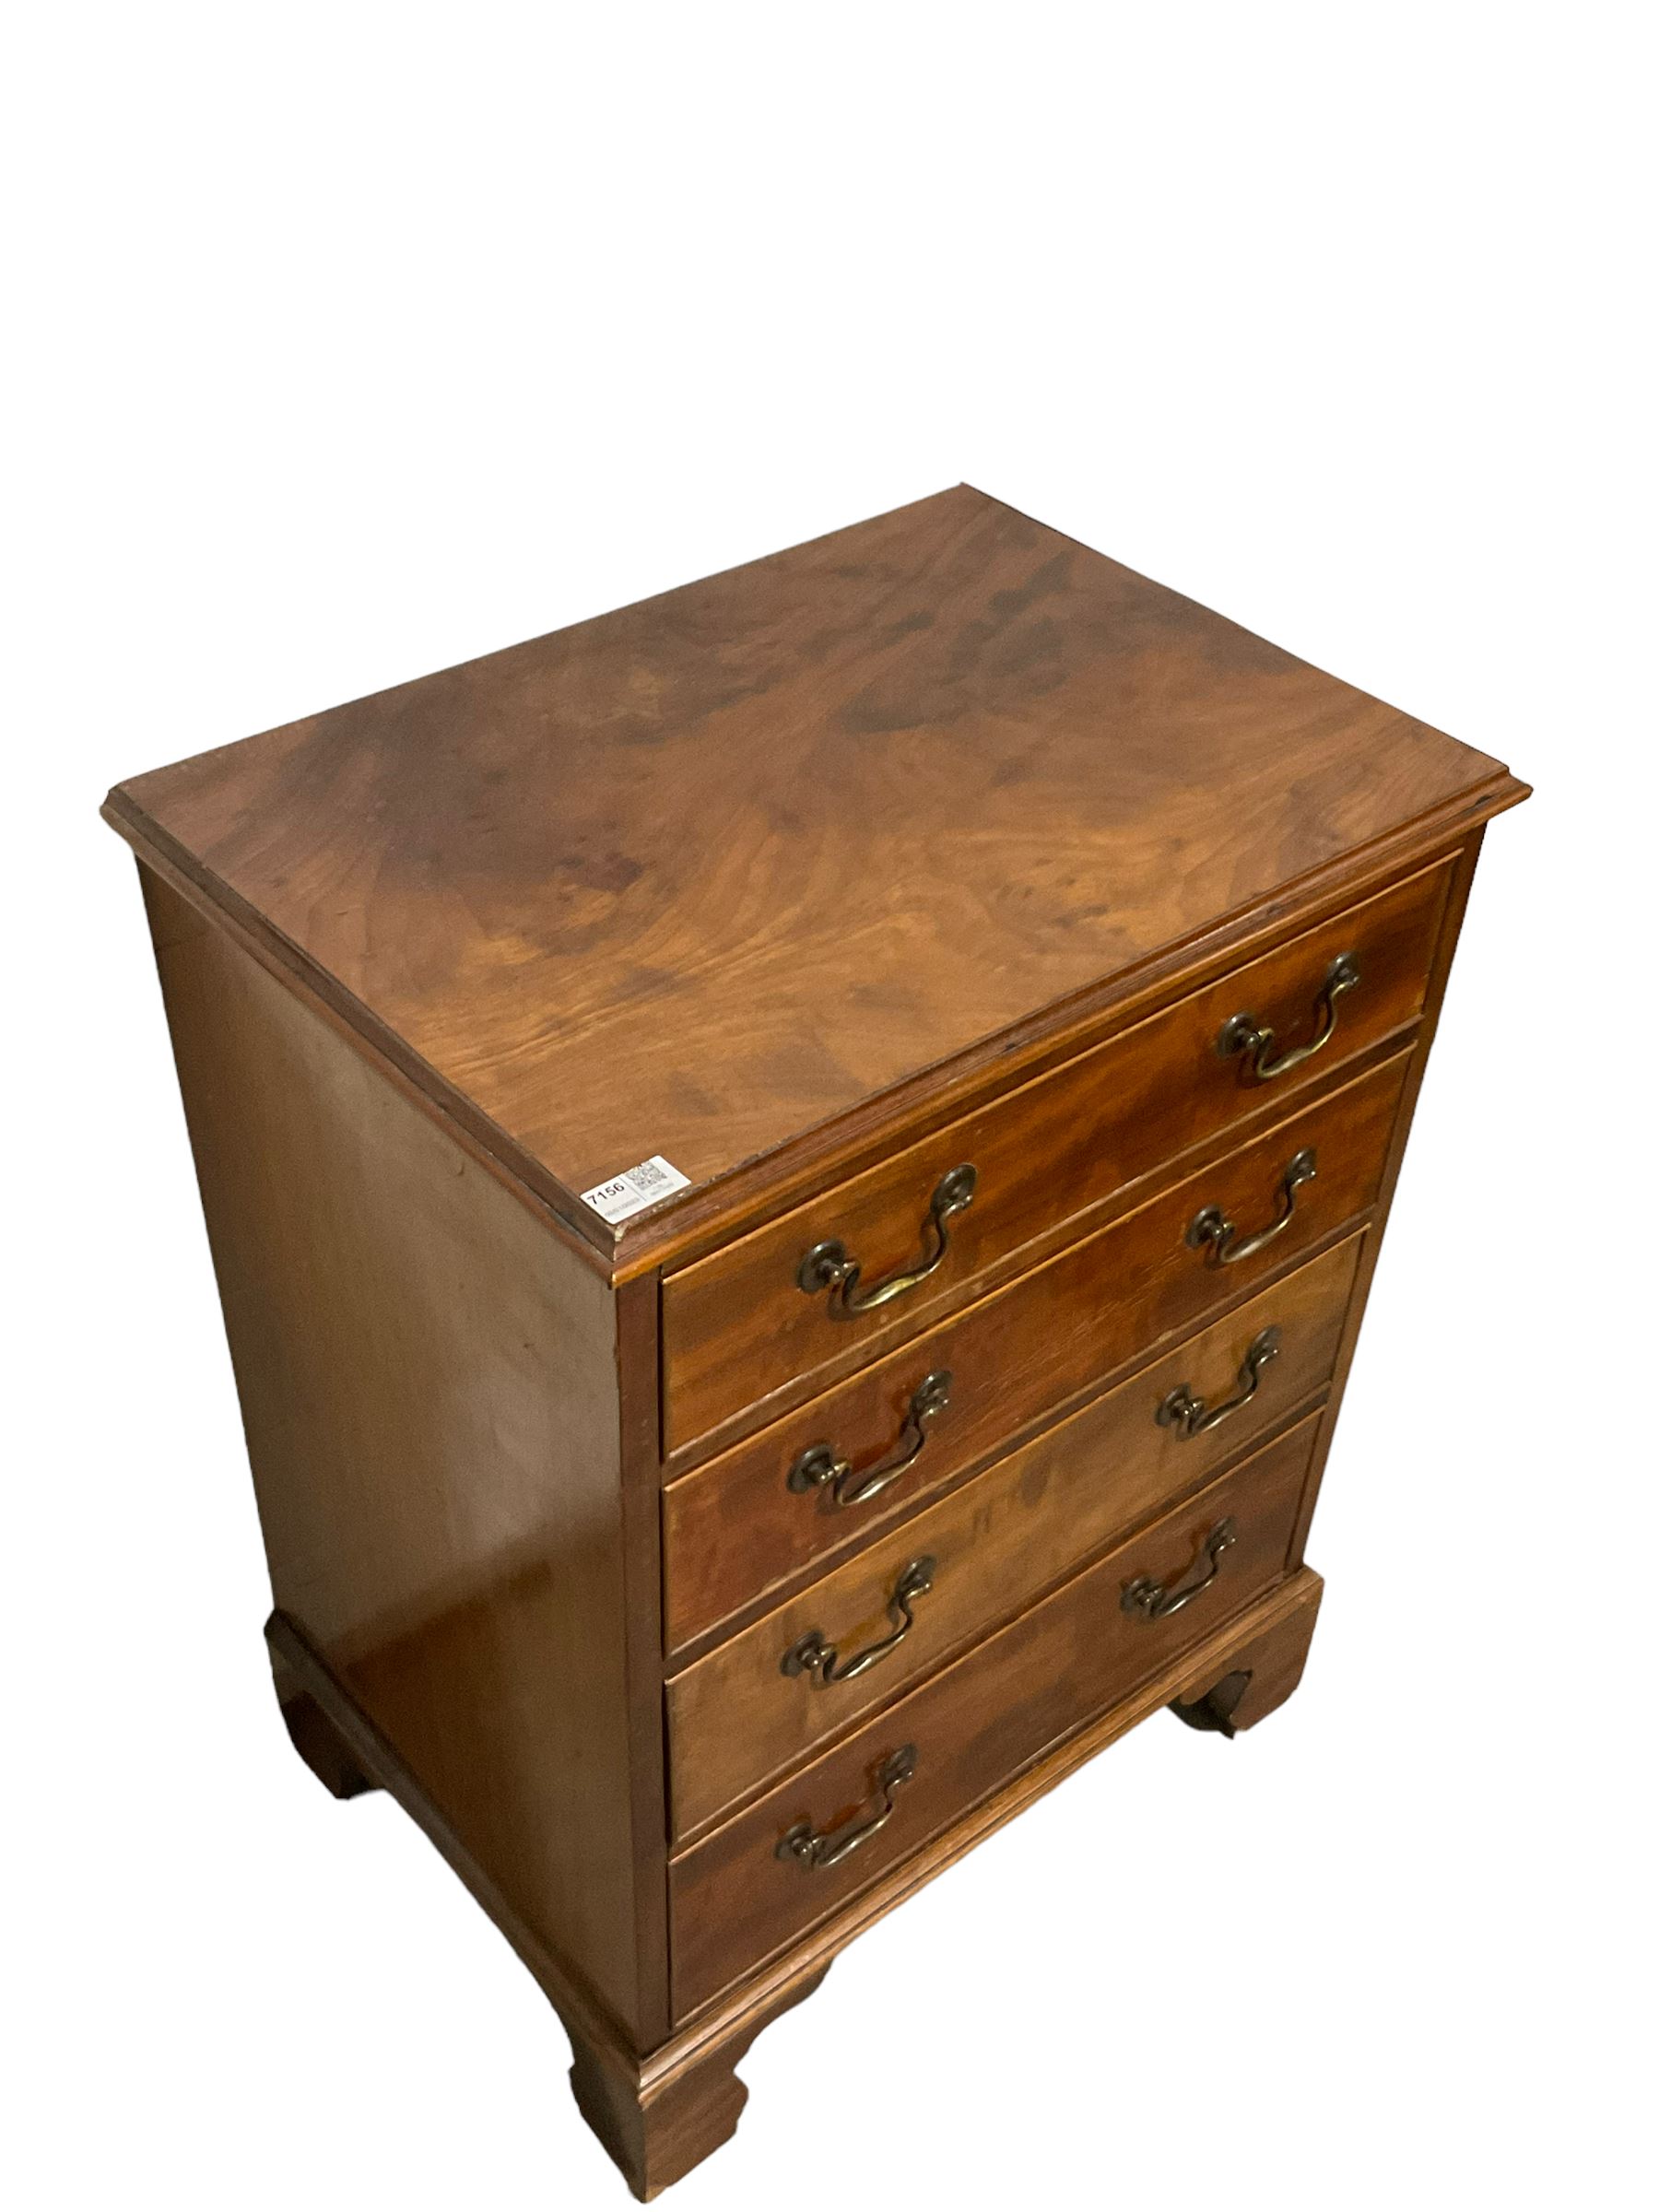 Georgian style mahogany chest of drawers - Image 3 of 5